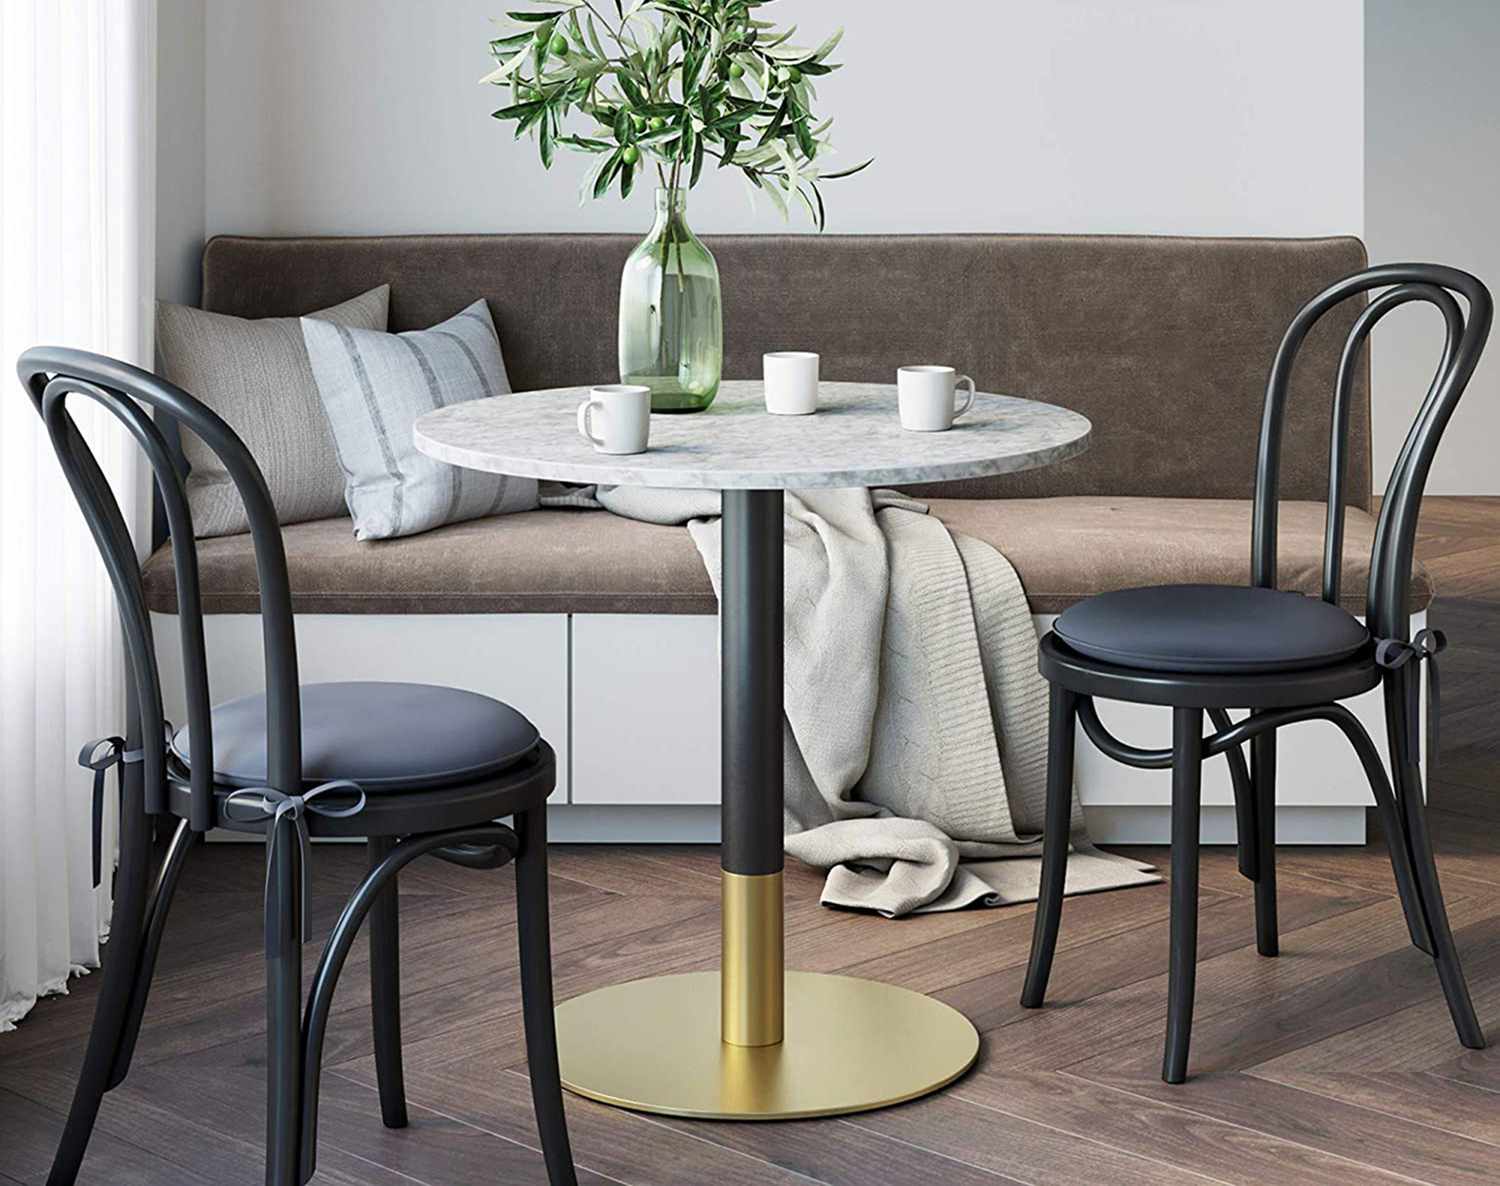 8 Best Dining Tables For Small Spaces, Small Dining Room Table